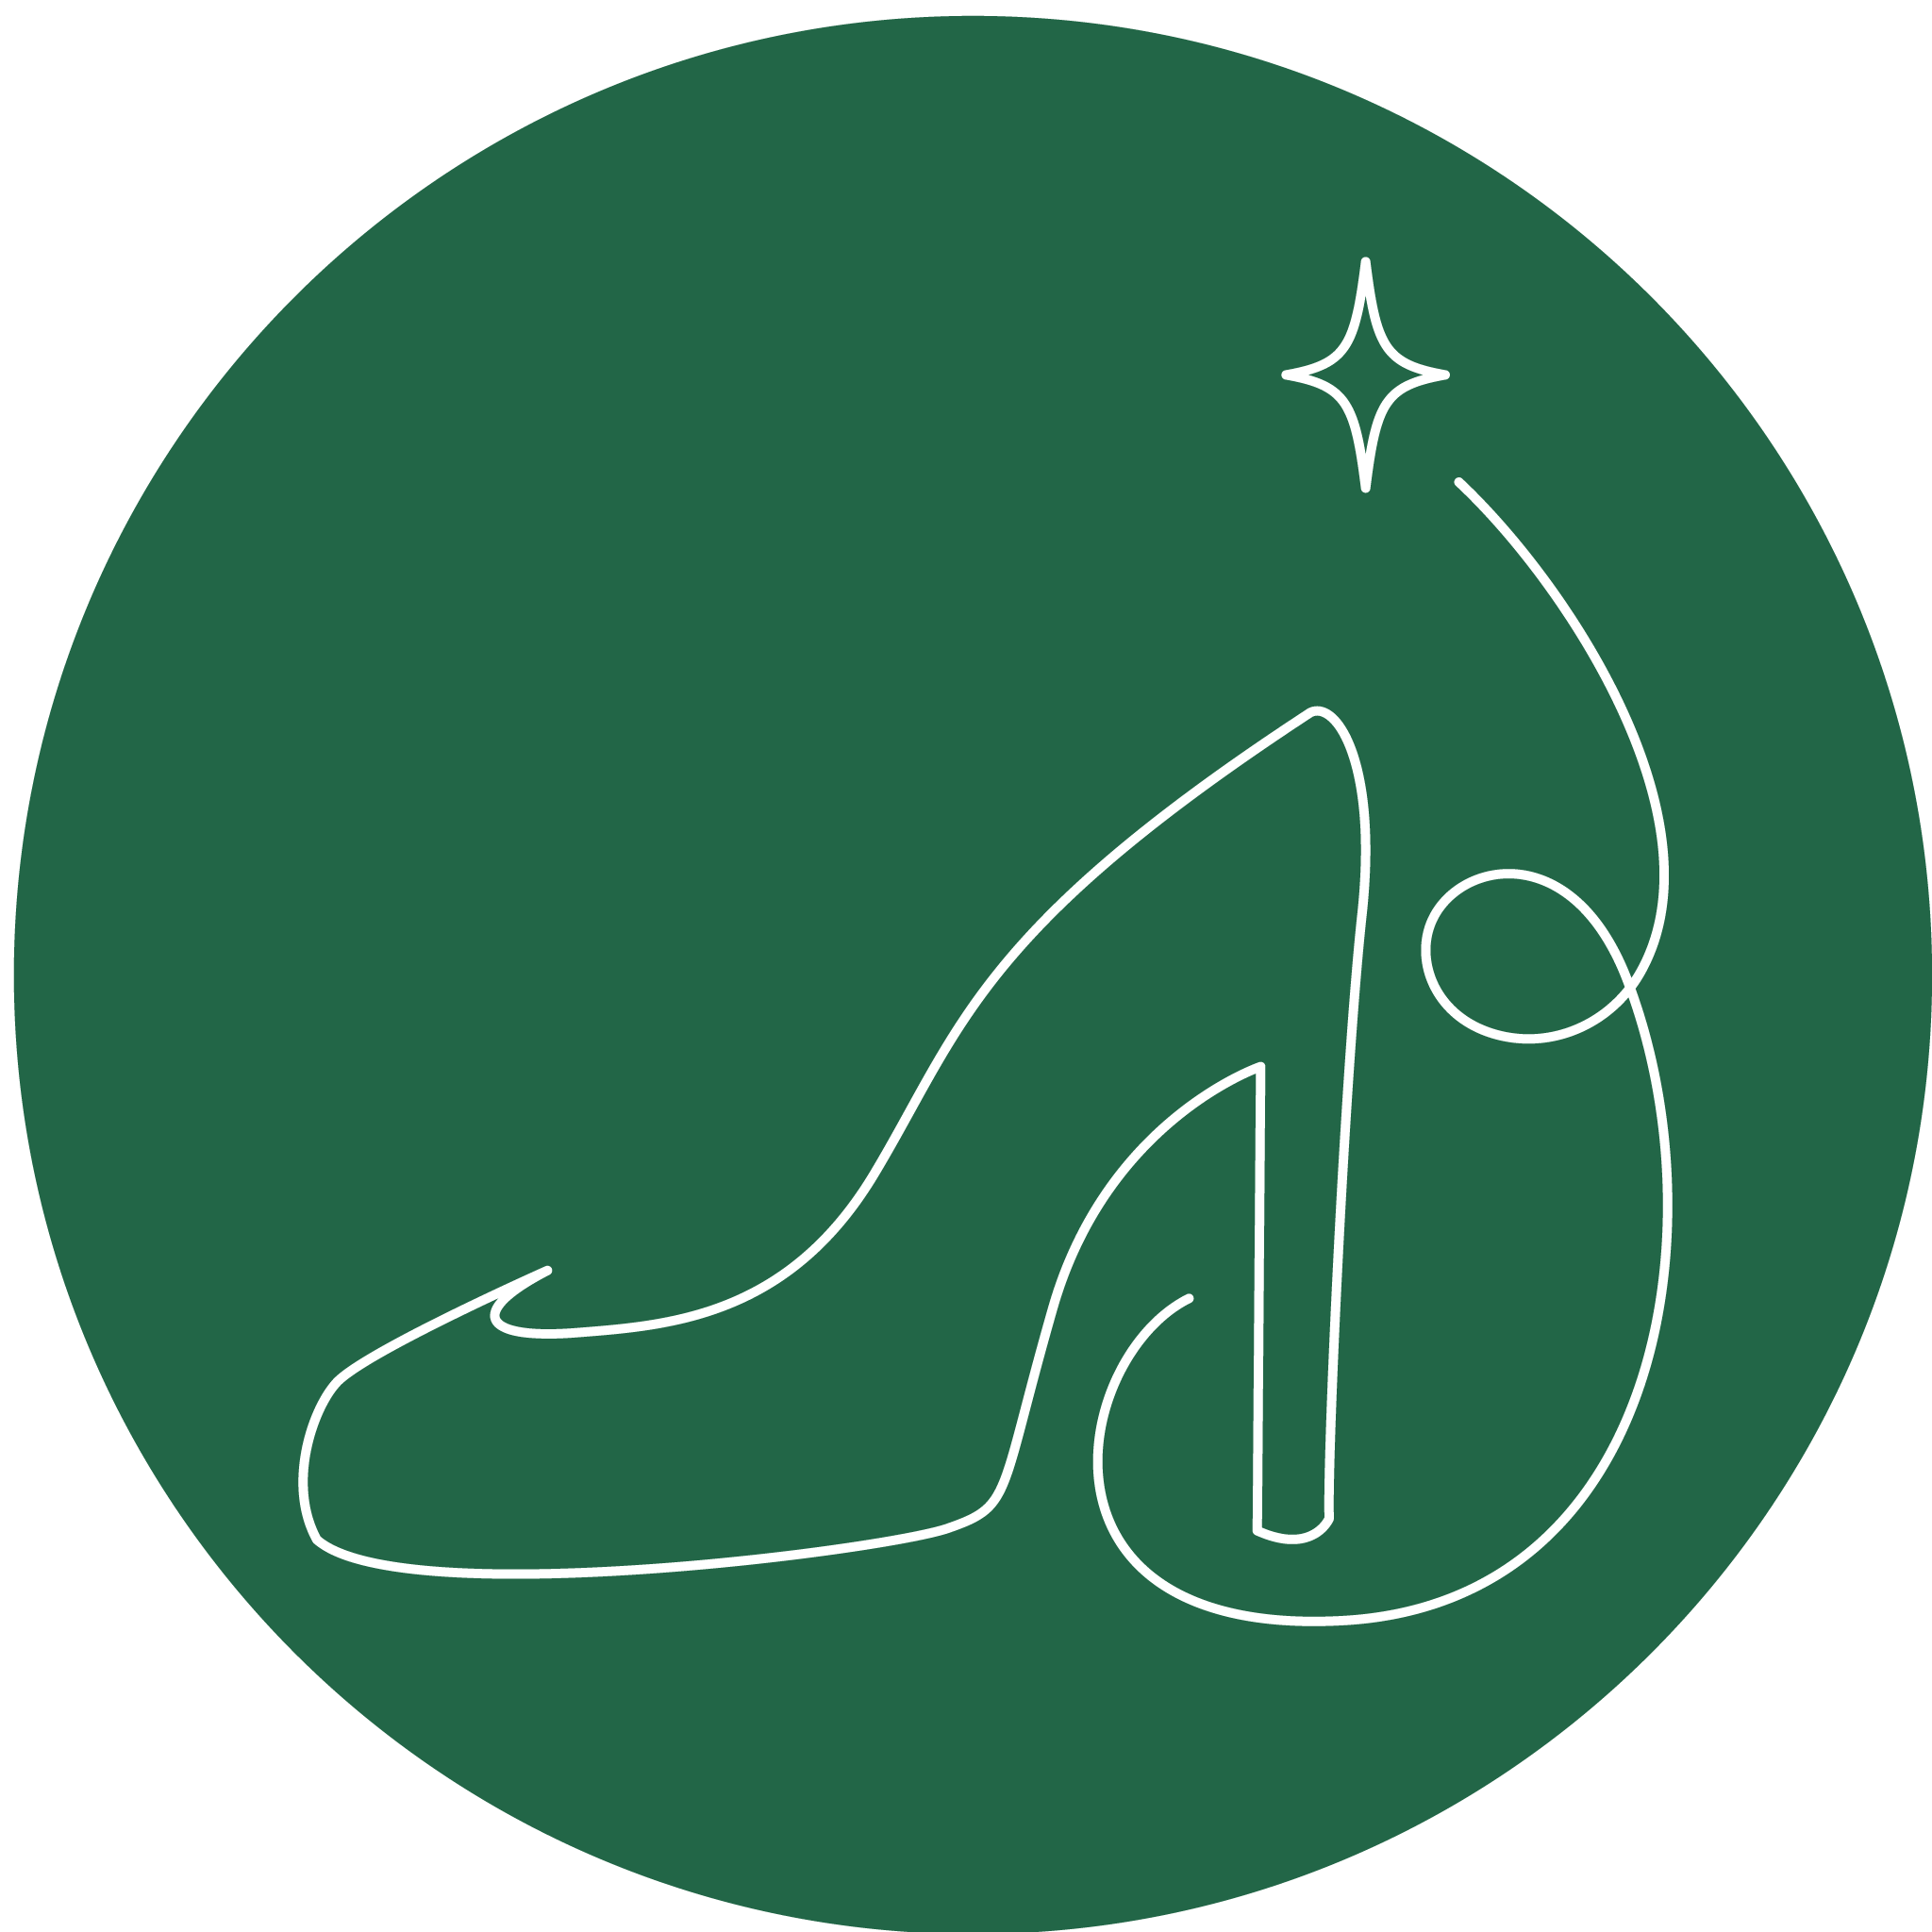 Icon for fashion. A high heel with trail and a star on a green background. Mostly works as decoration on about me page.